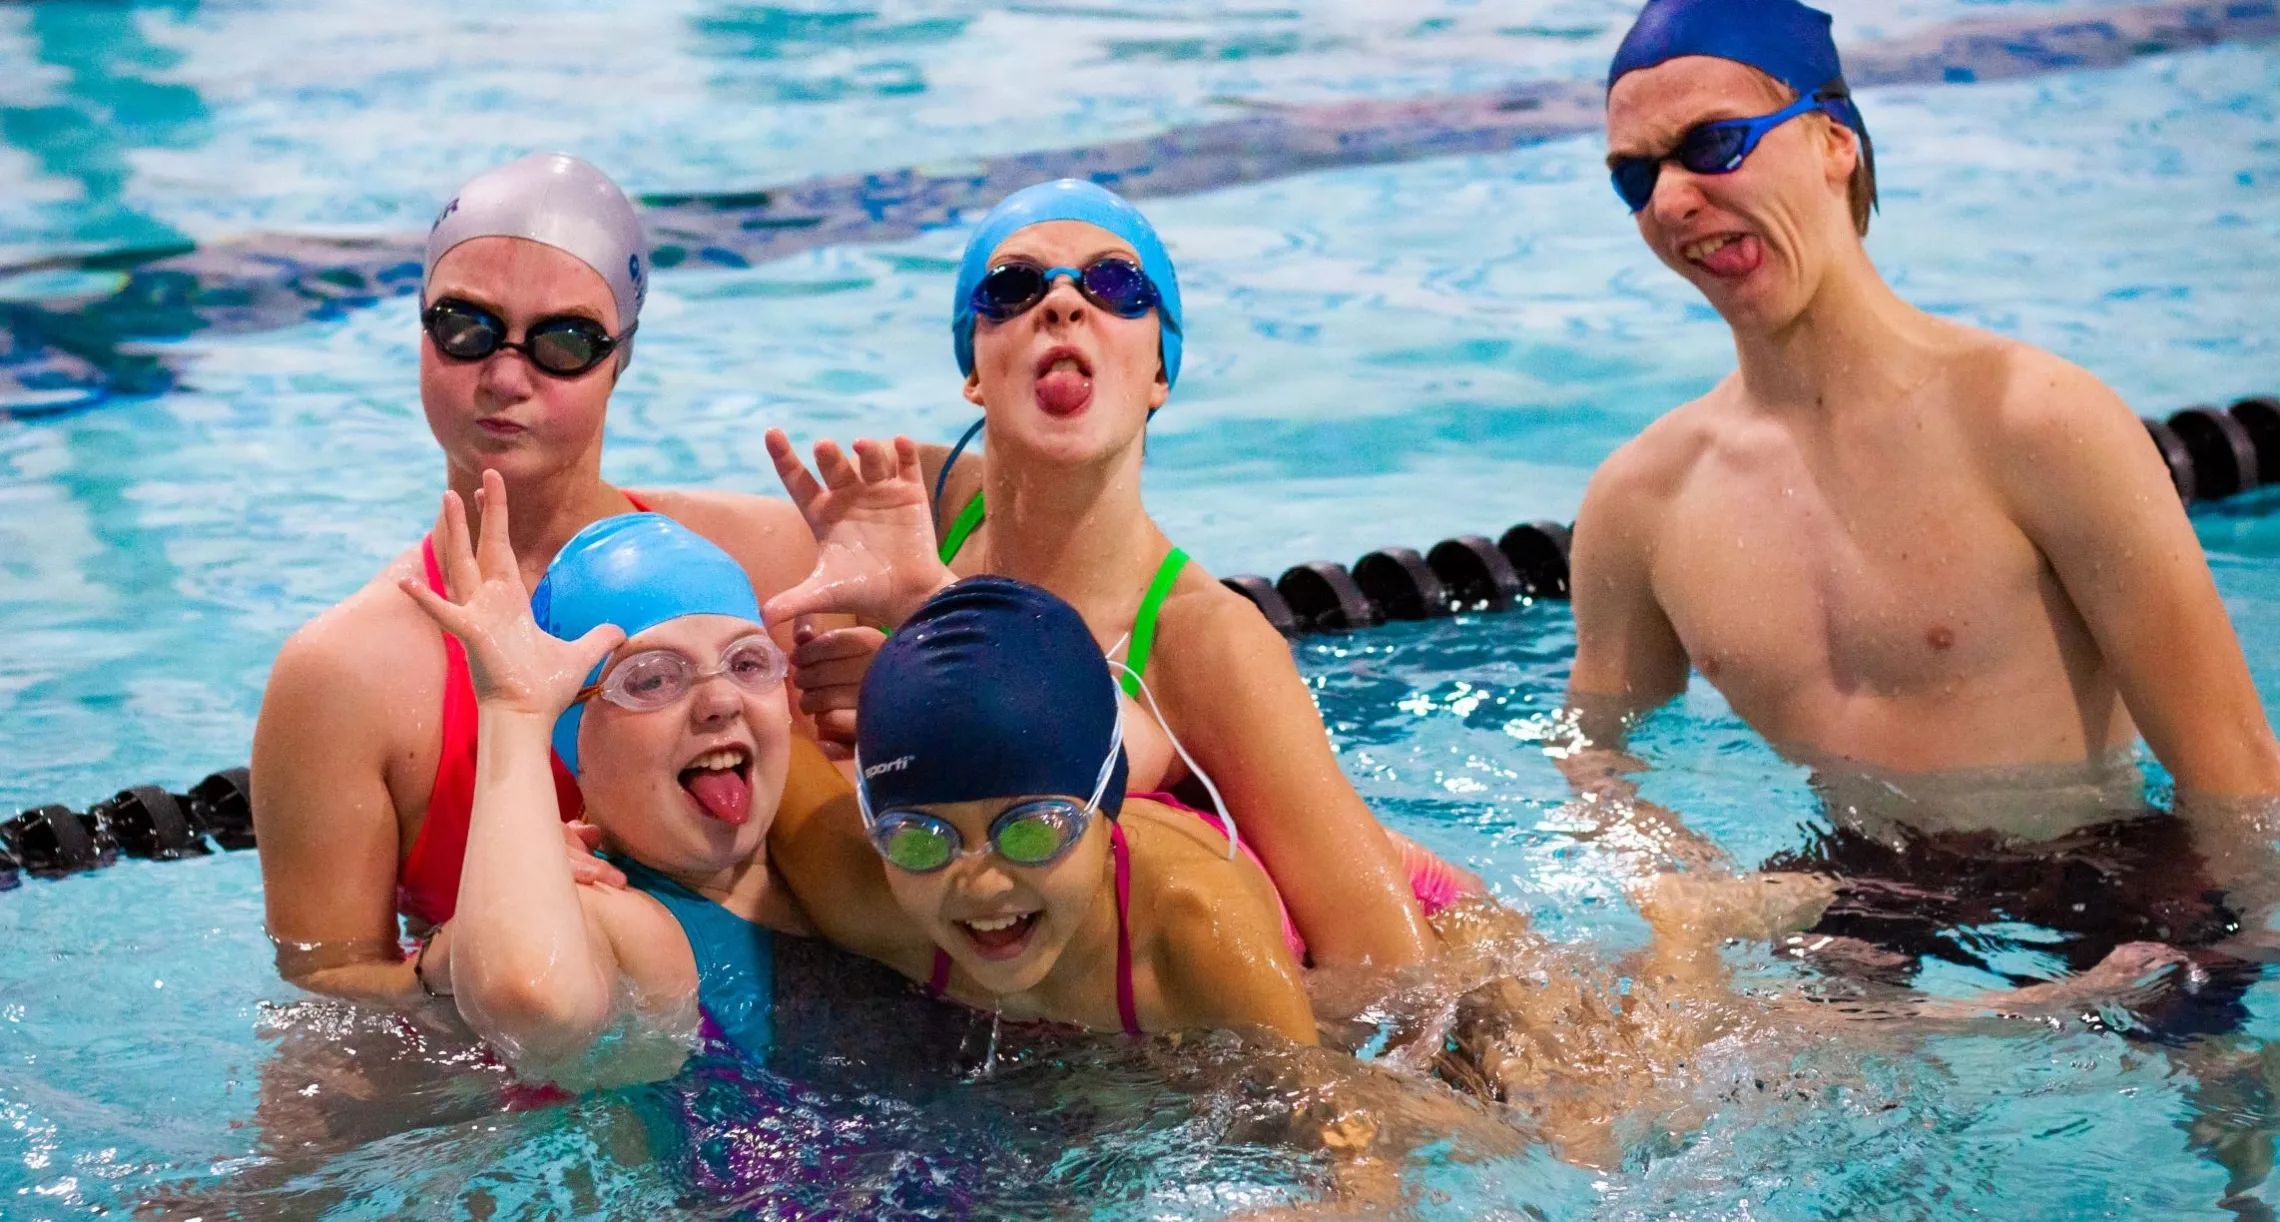 Five older children or young teens wearing swim caps and goggles make goofy faces at the camera while taking a break from swimming laps.